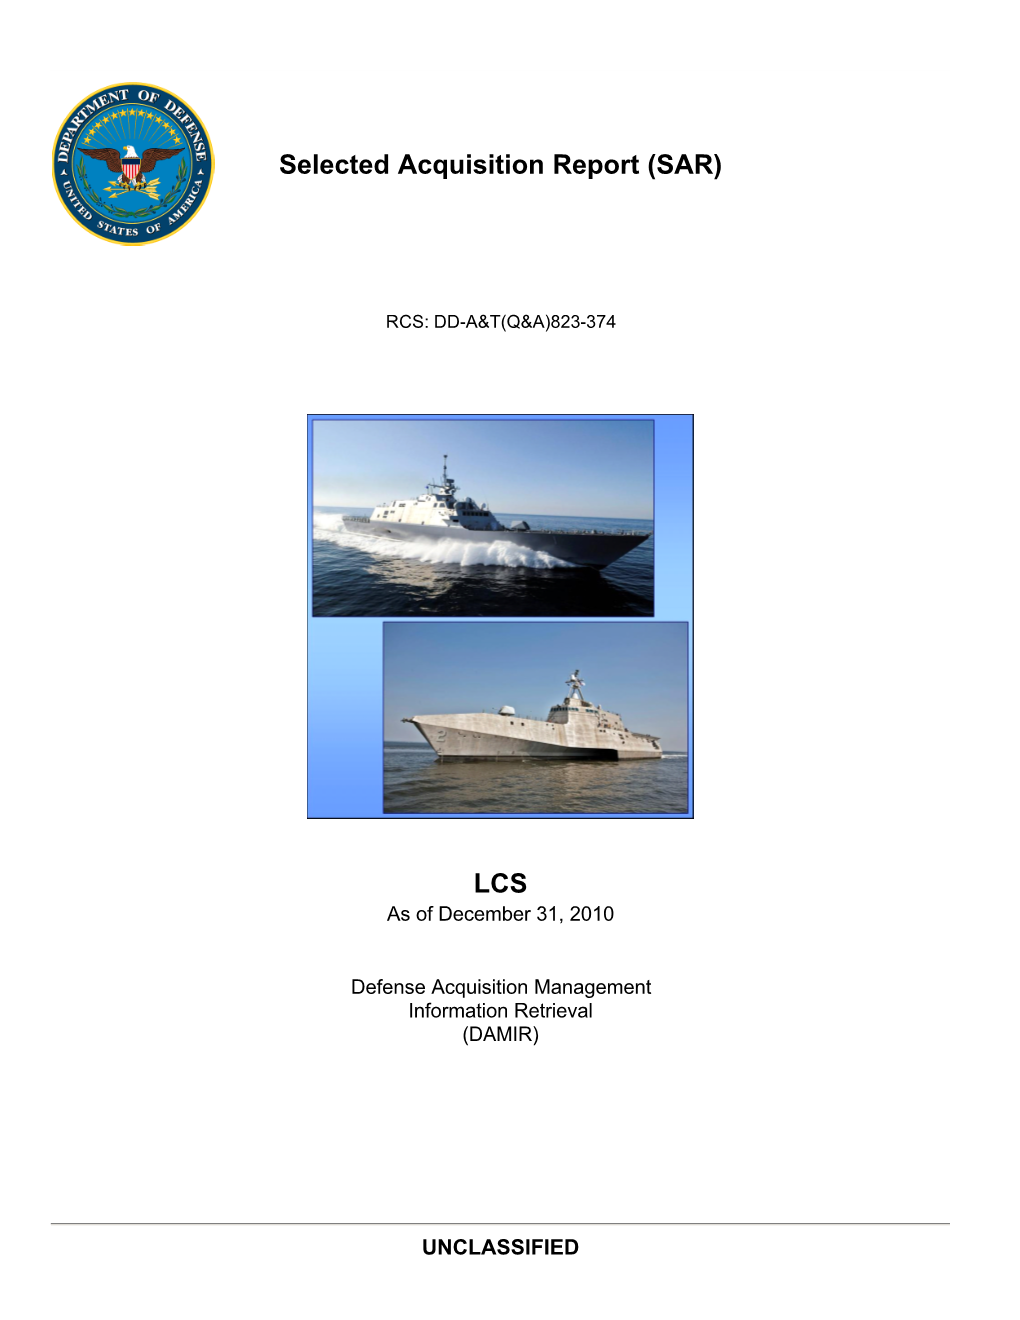 Littoral Combat Ship (LCS) Selected Acquisition Report (SAR)